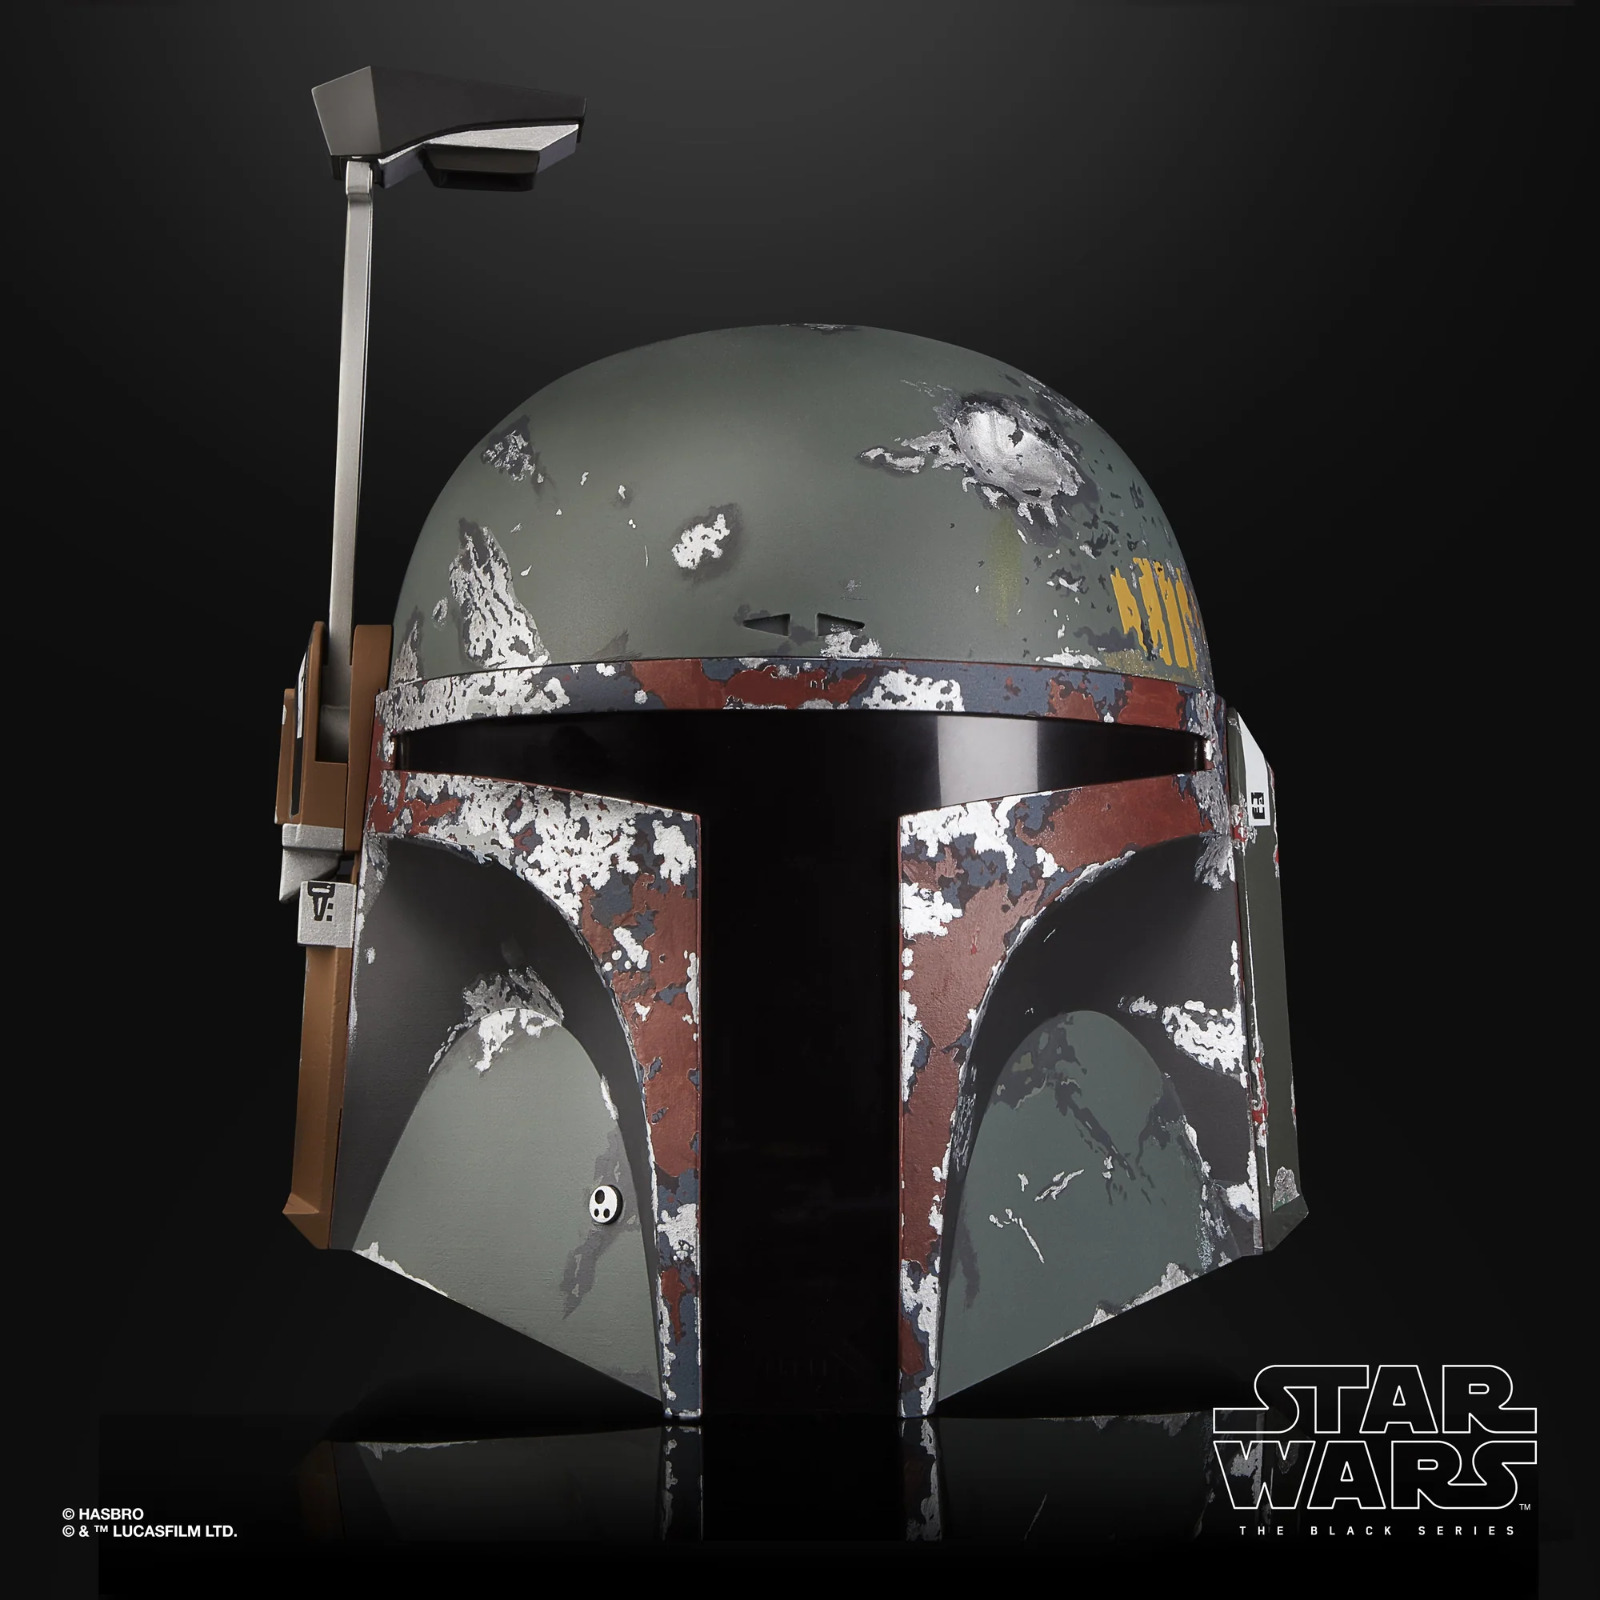 Star Wars The Black Series Boba Fett Premium Electronic Helmet Roleplay Collecti